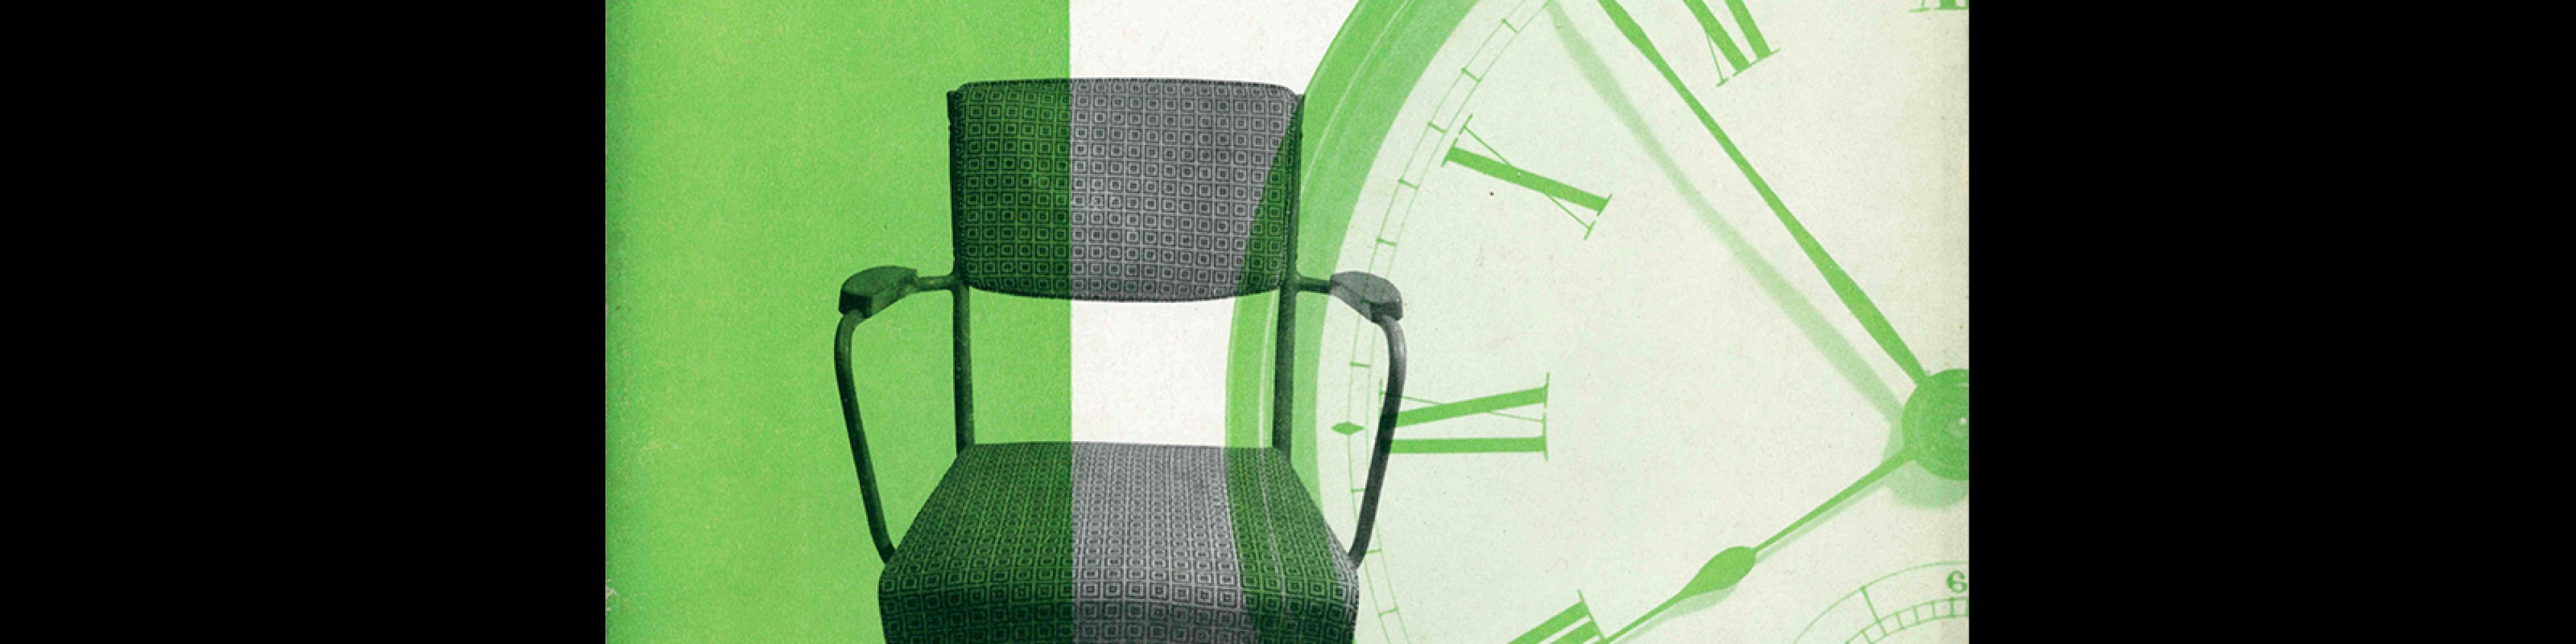 Design, Council of Industrial Design, 92, January 1956. Cover design by Ken Garland